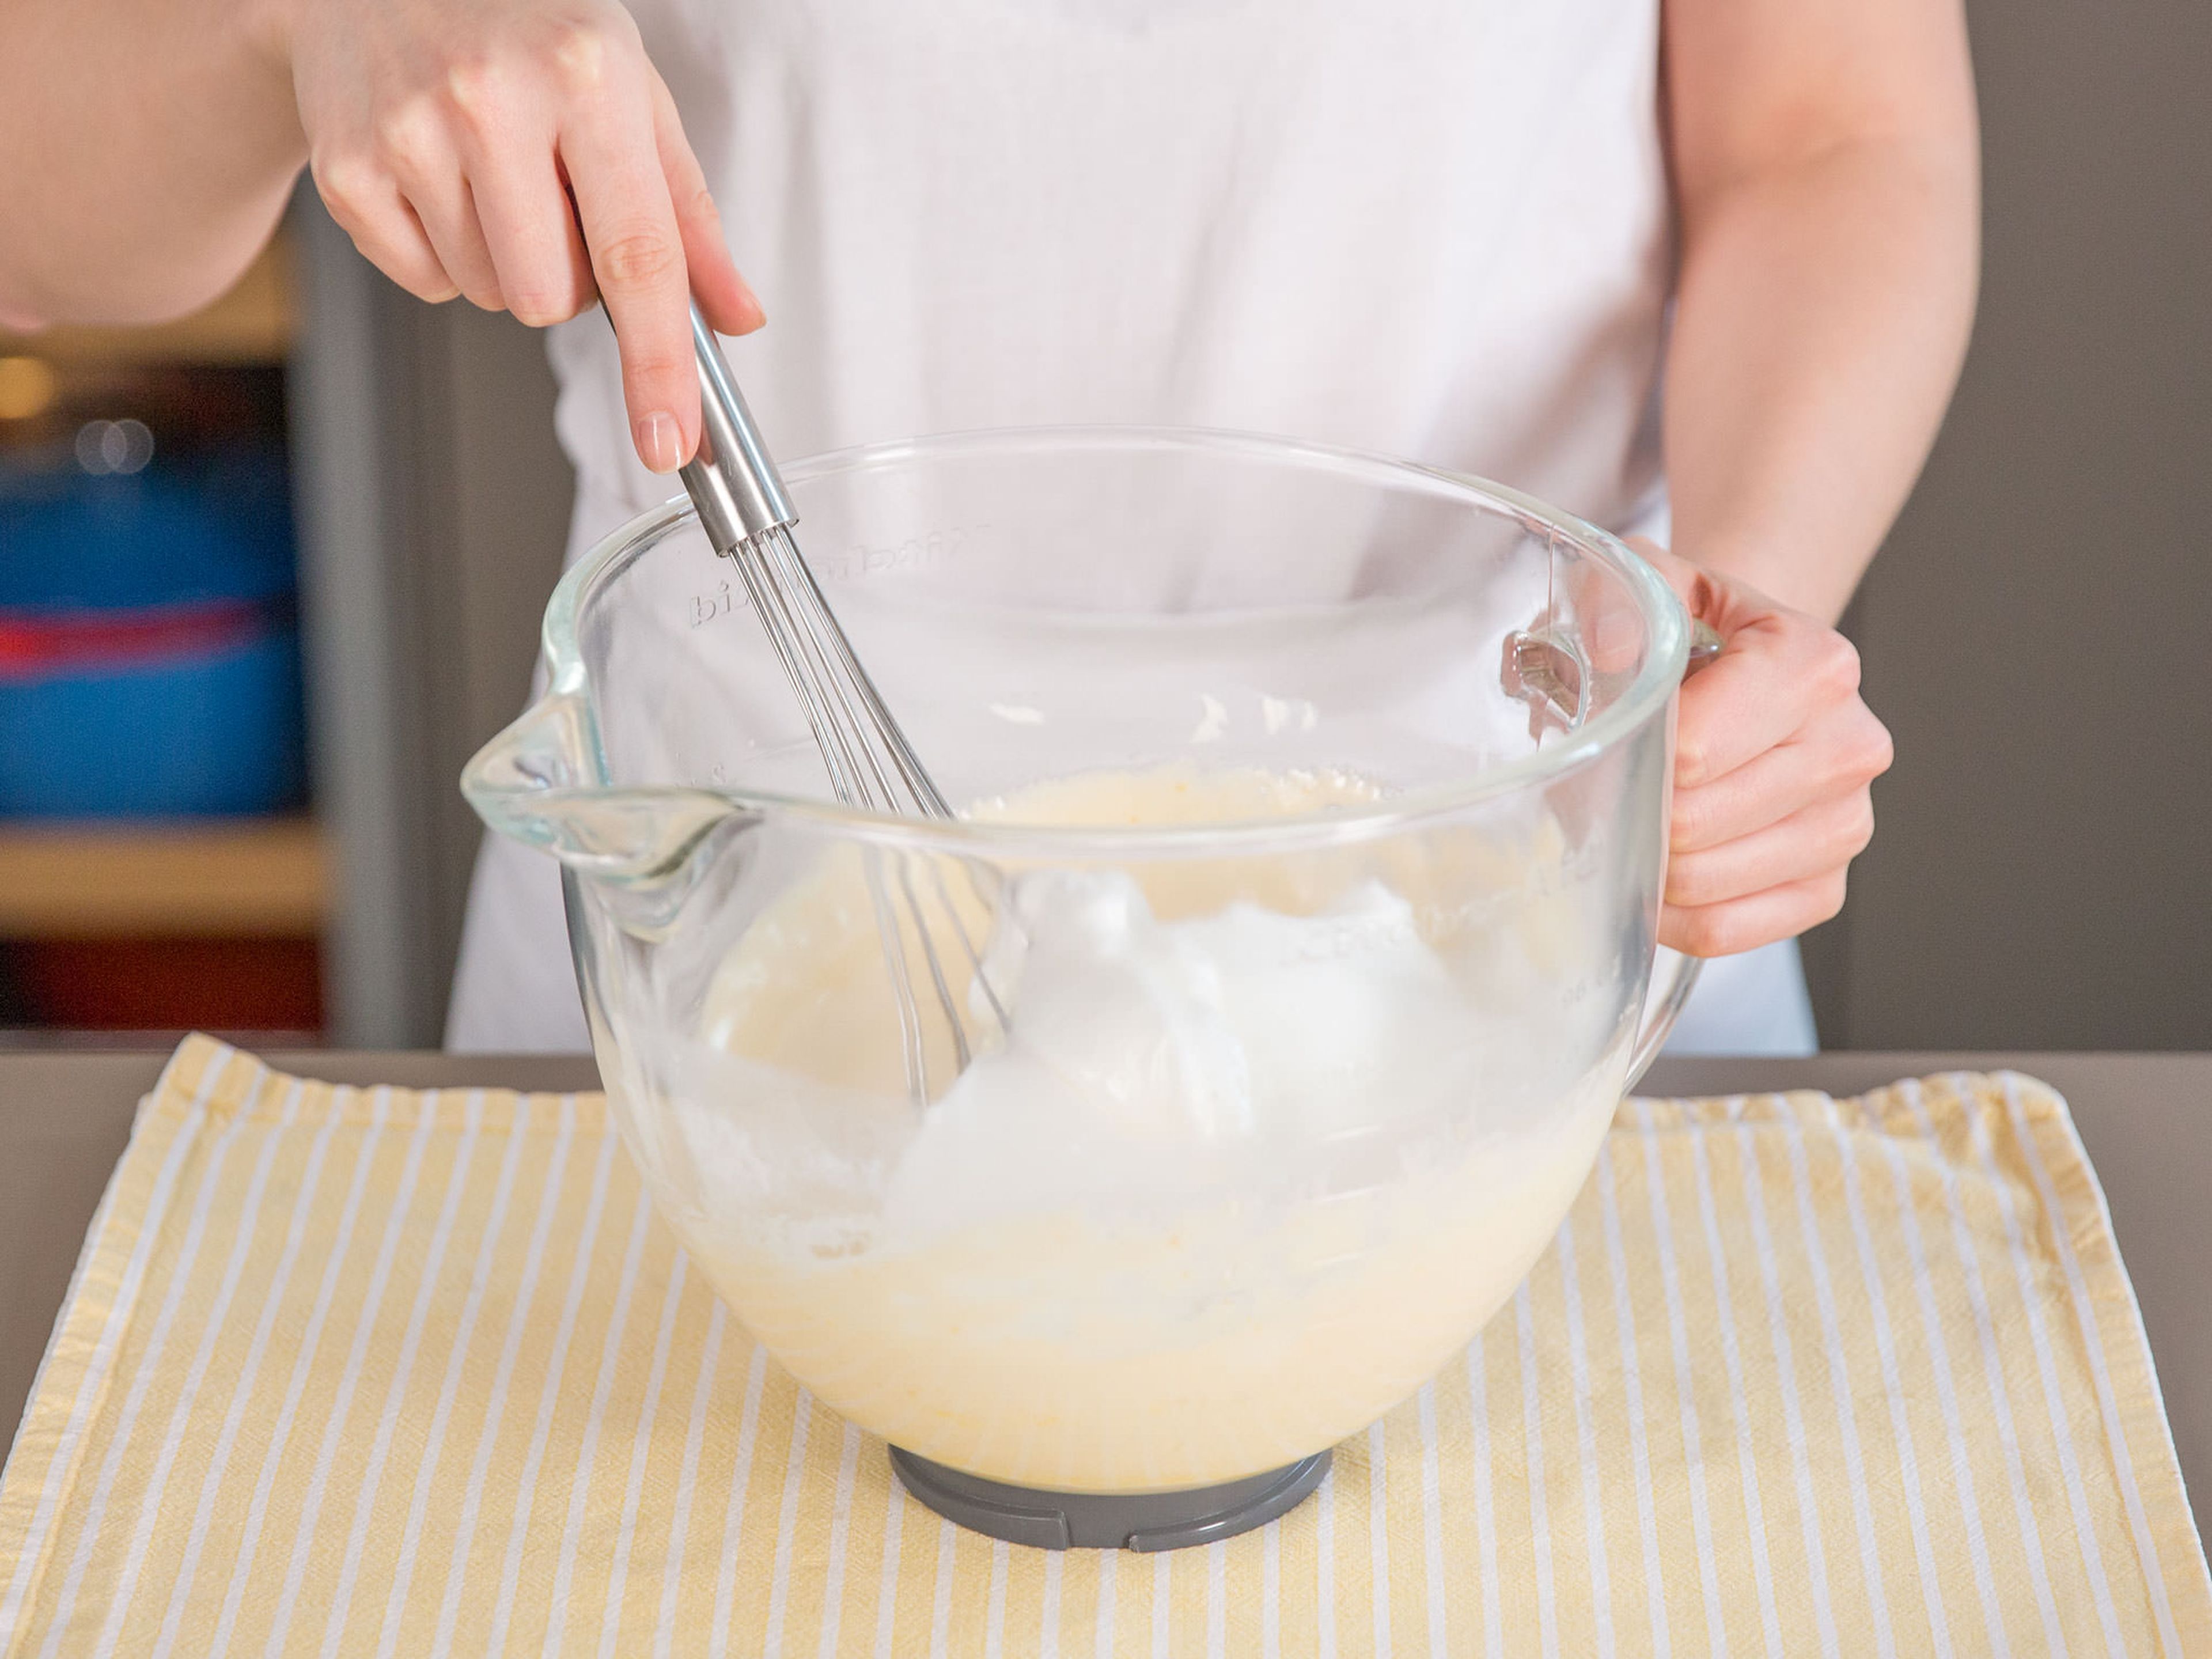 Add egg white mixture to egg yolk mixture and whisk carefully until just incorporated.